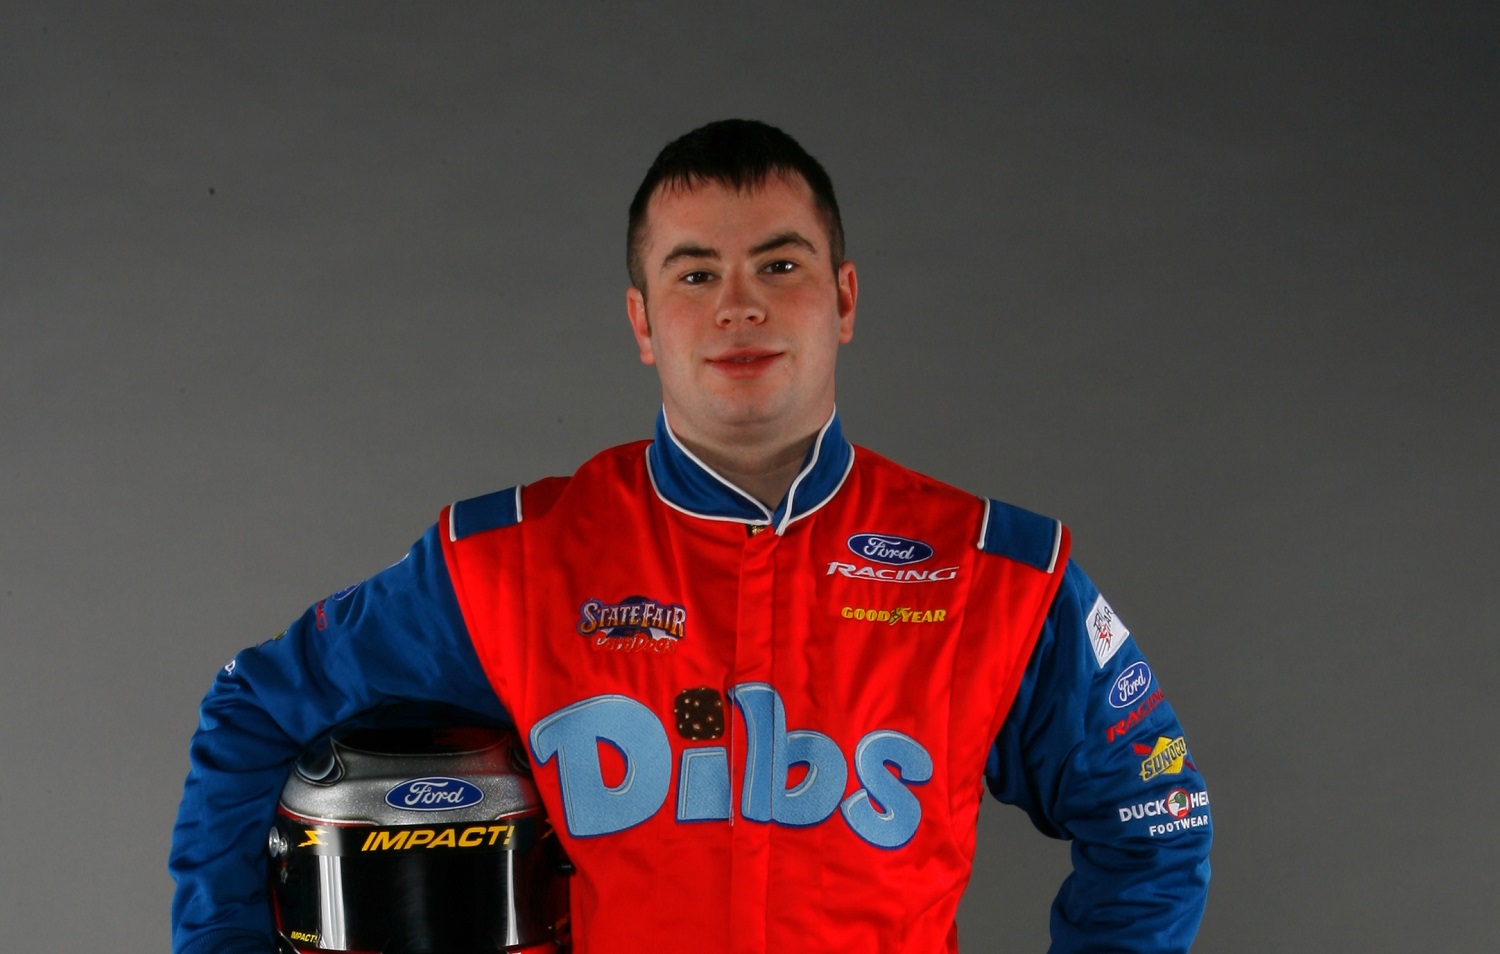 Bobby East, driver of the No. 21 Ford during the NASCAR Craftsman Truck Series media day at Daytona International Speedway on Feb. 9, 2006.